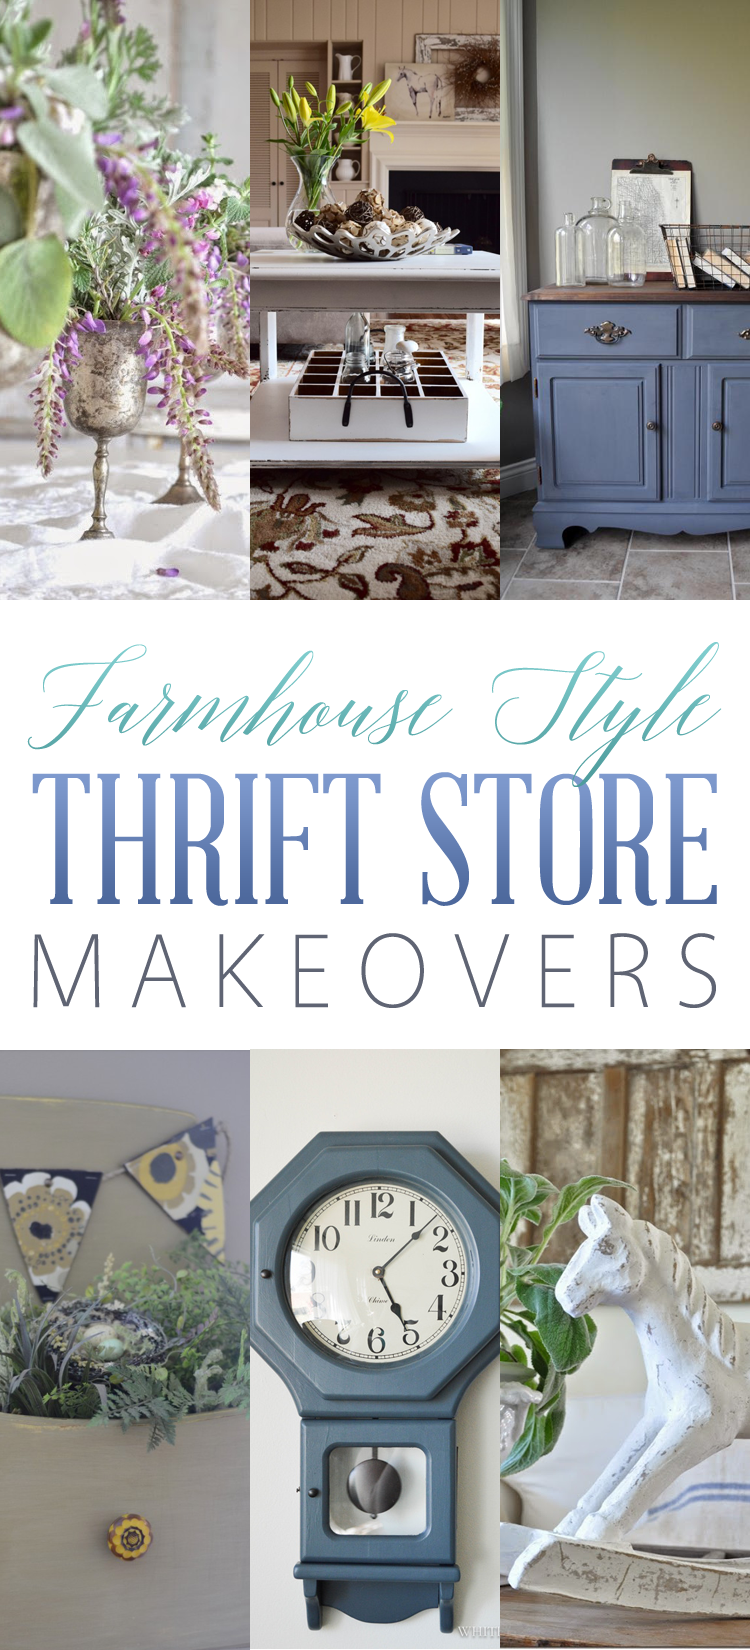 http://thecottagemarket.com/wp-content/uploads/2015/09/ThriftStore-TOWER-1.png